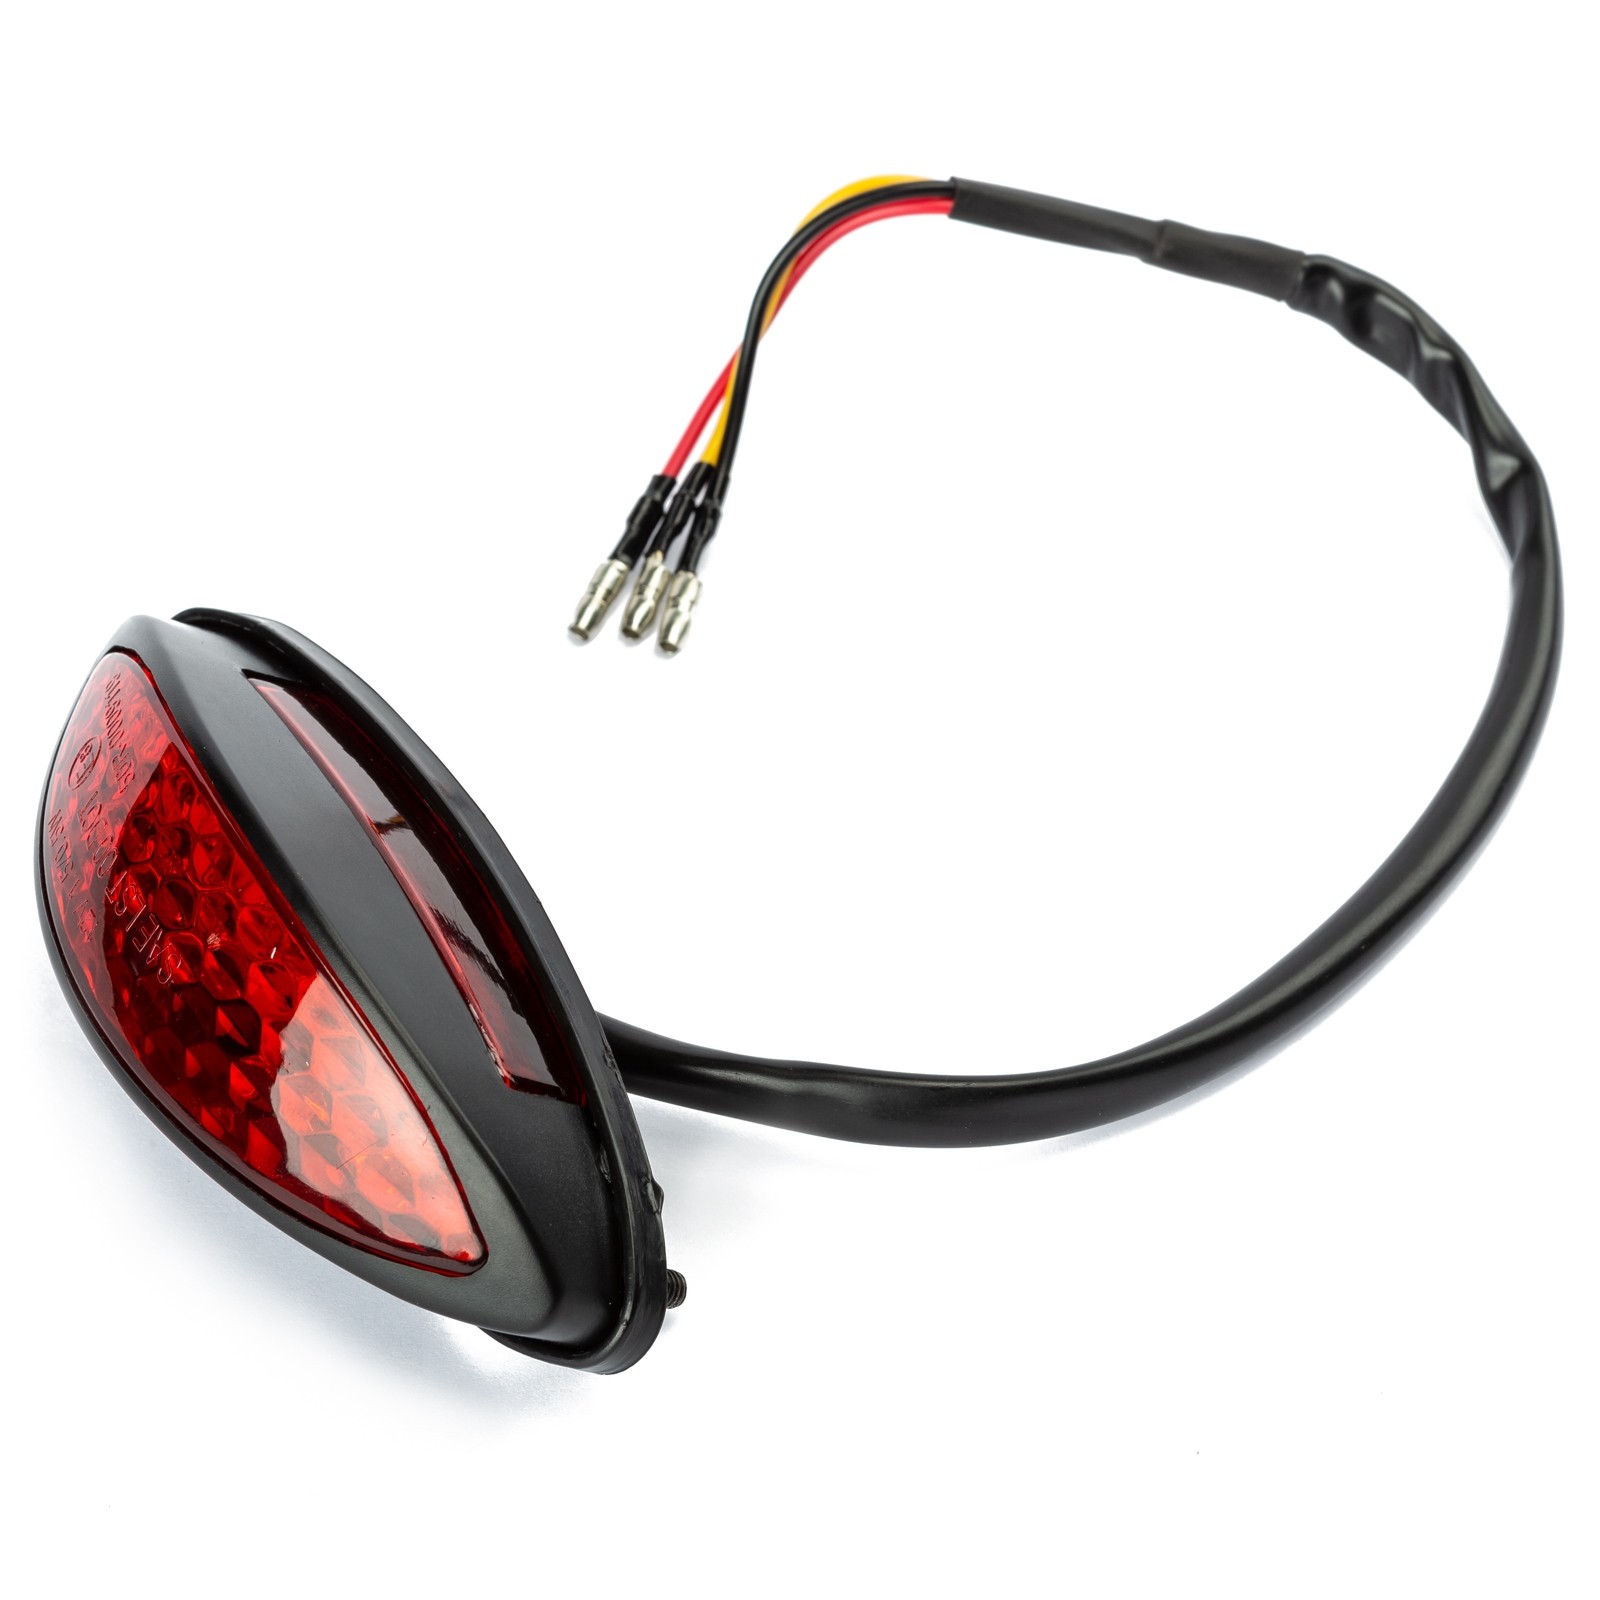 TNT stop / fanale / faro posteriore universale 15 led leds space posizione  stop moto scooter rosso 204412